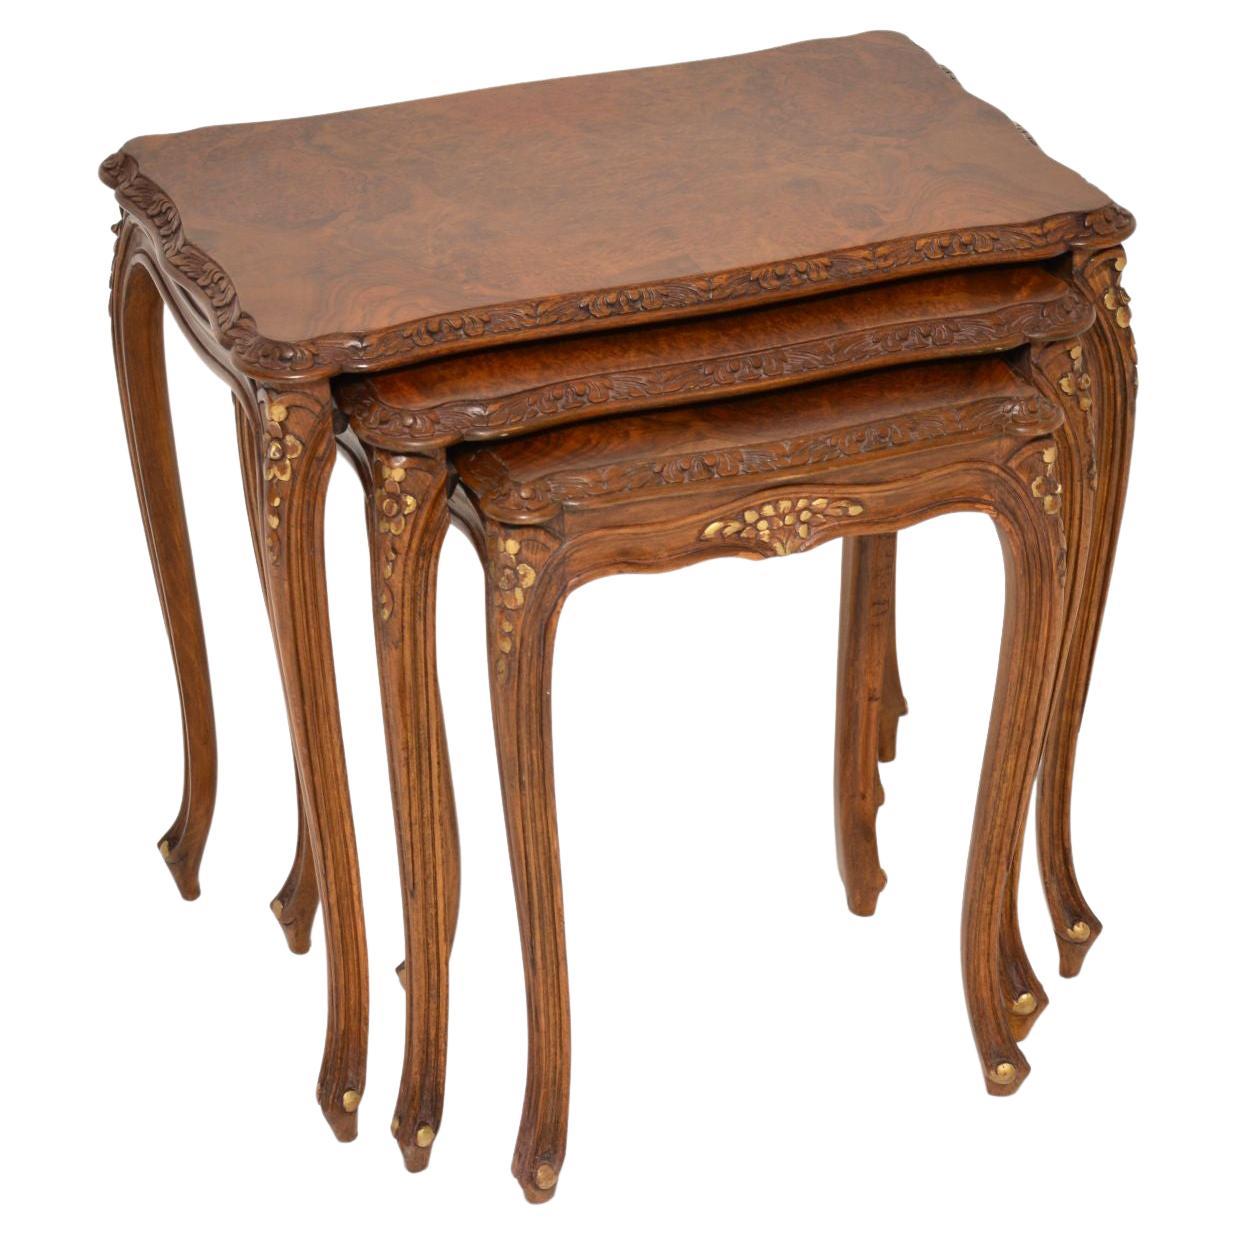 Antique French Burr Walnut Nest of Tables